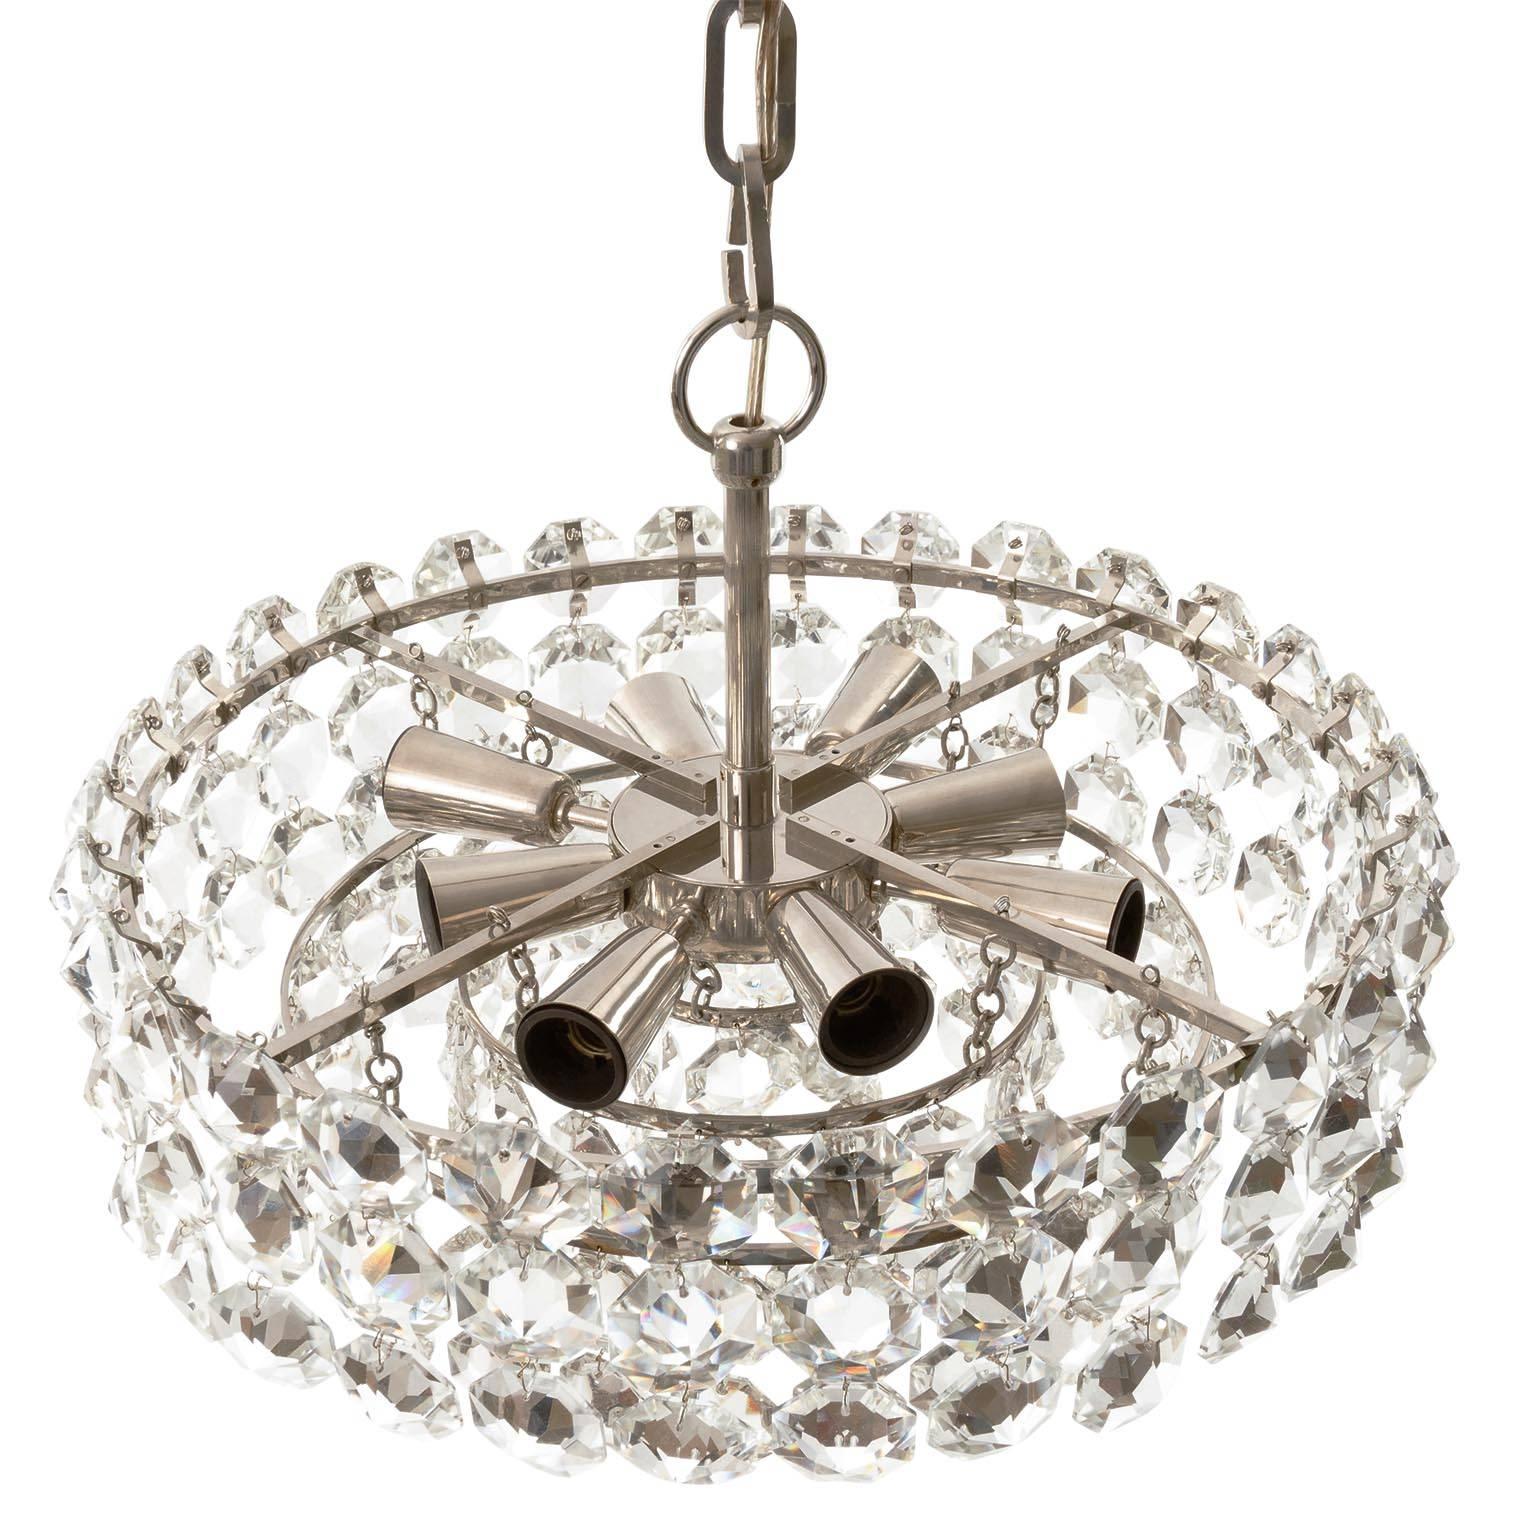 One of Two Bakalowits Chandeliers Pendant Lights, Nickel Glass, 1960s For Sale 4